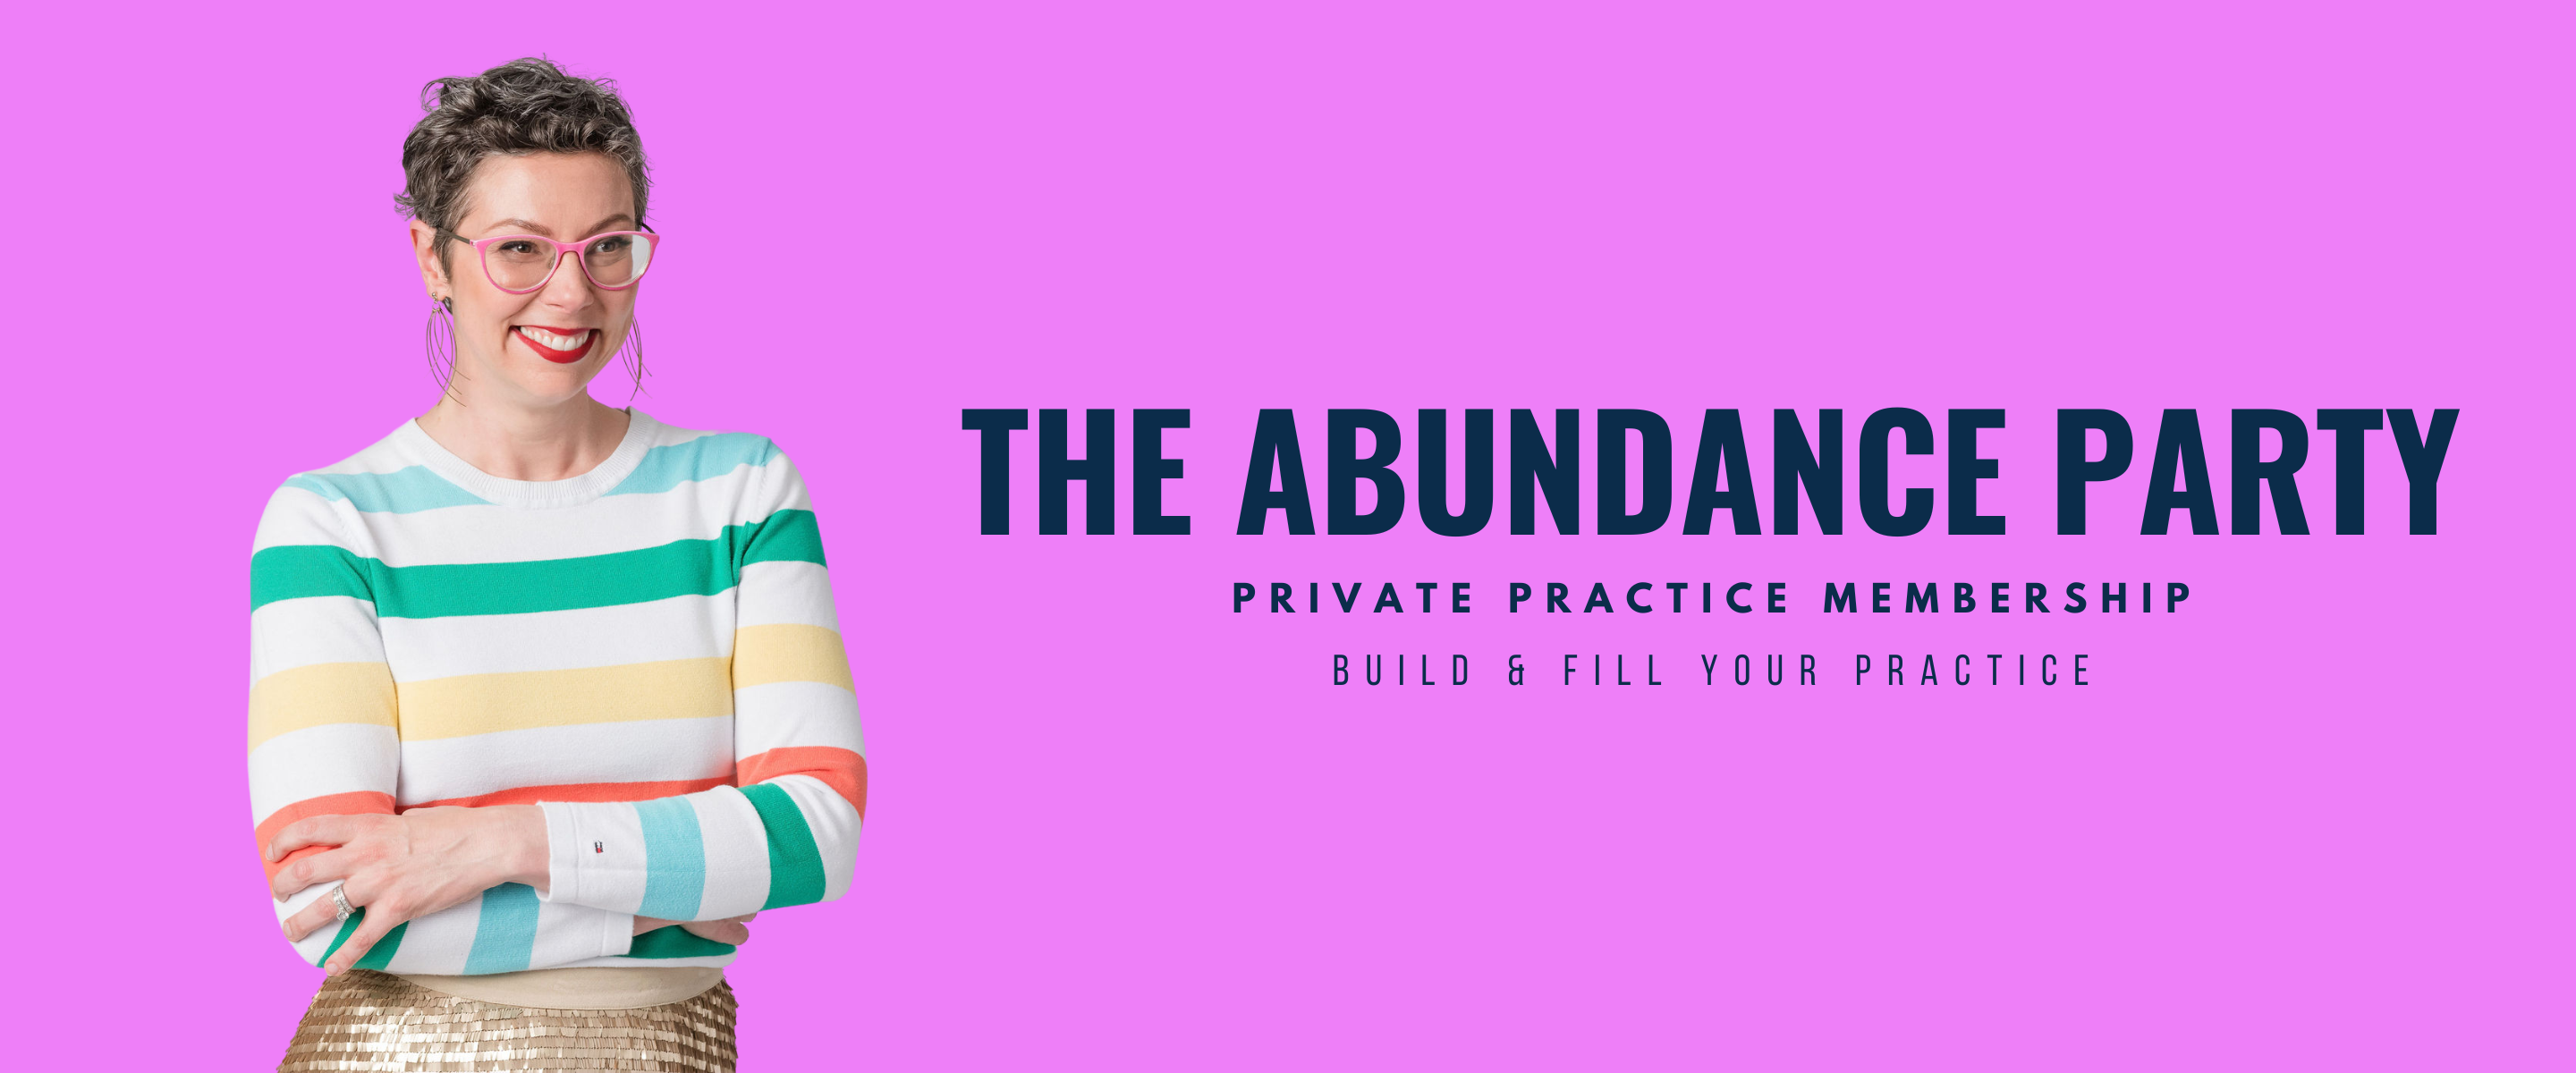 The Abundance Party Private Practice Support